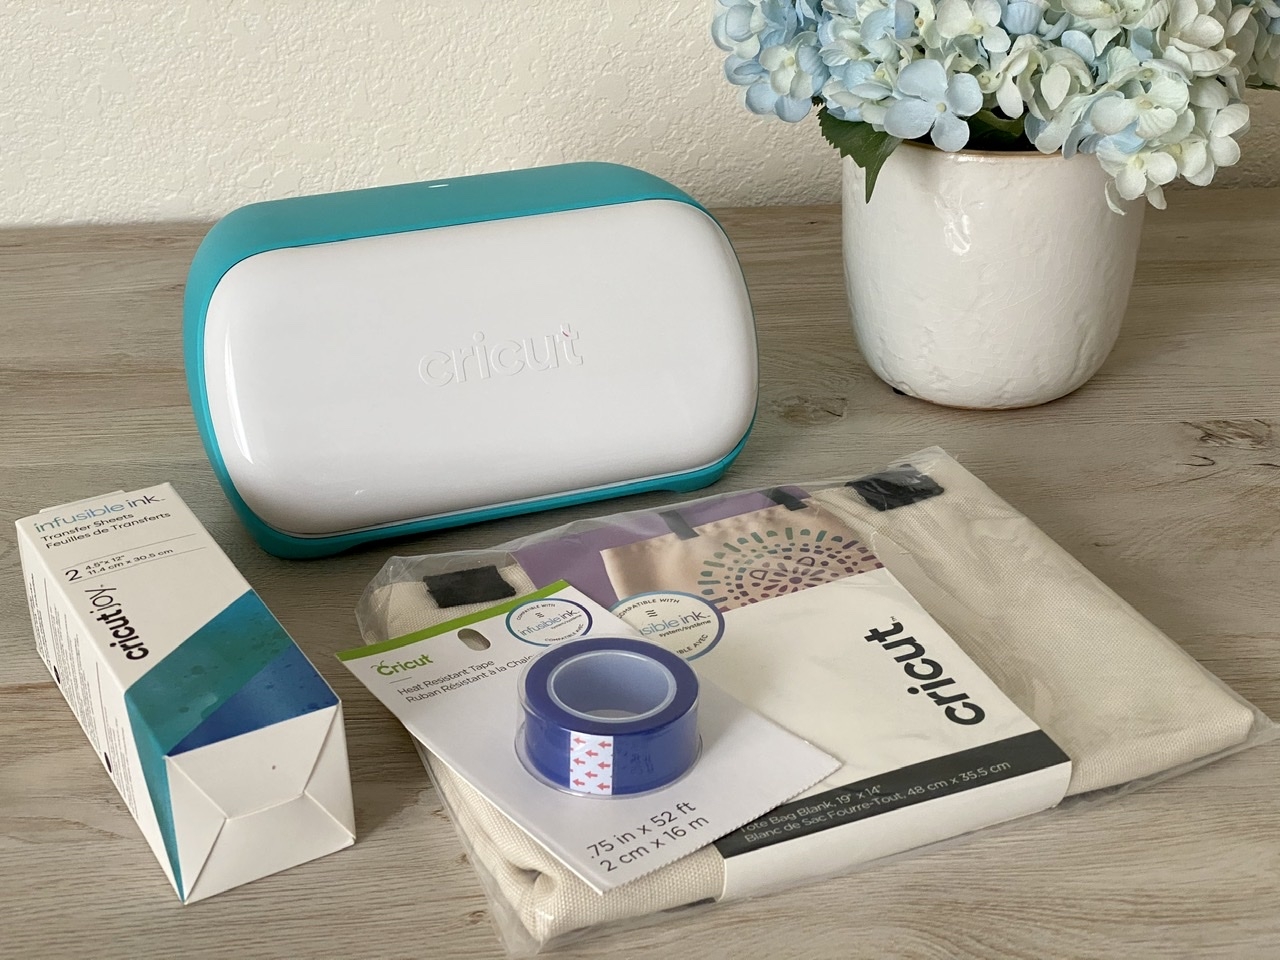 Travel with your Cricut Joy - MollieOllie Mimmo Caddy Review - Take your  Cricut anywhere 